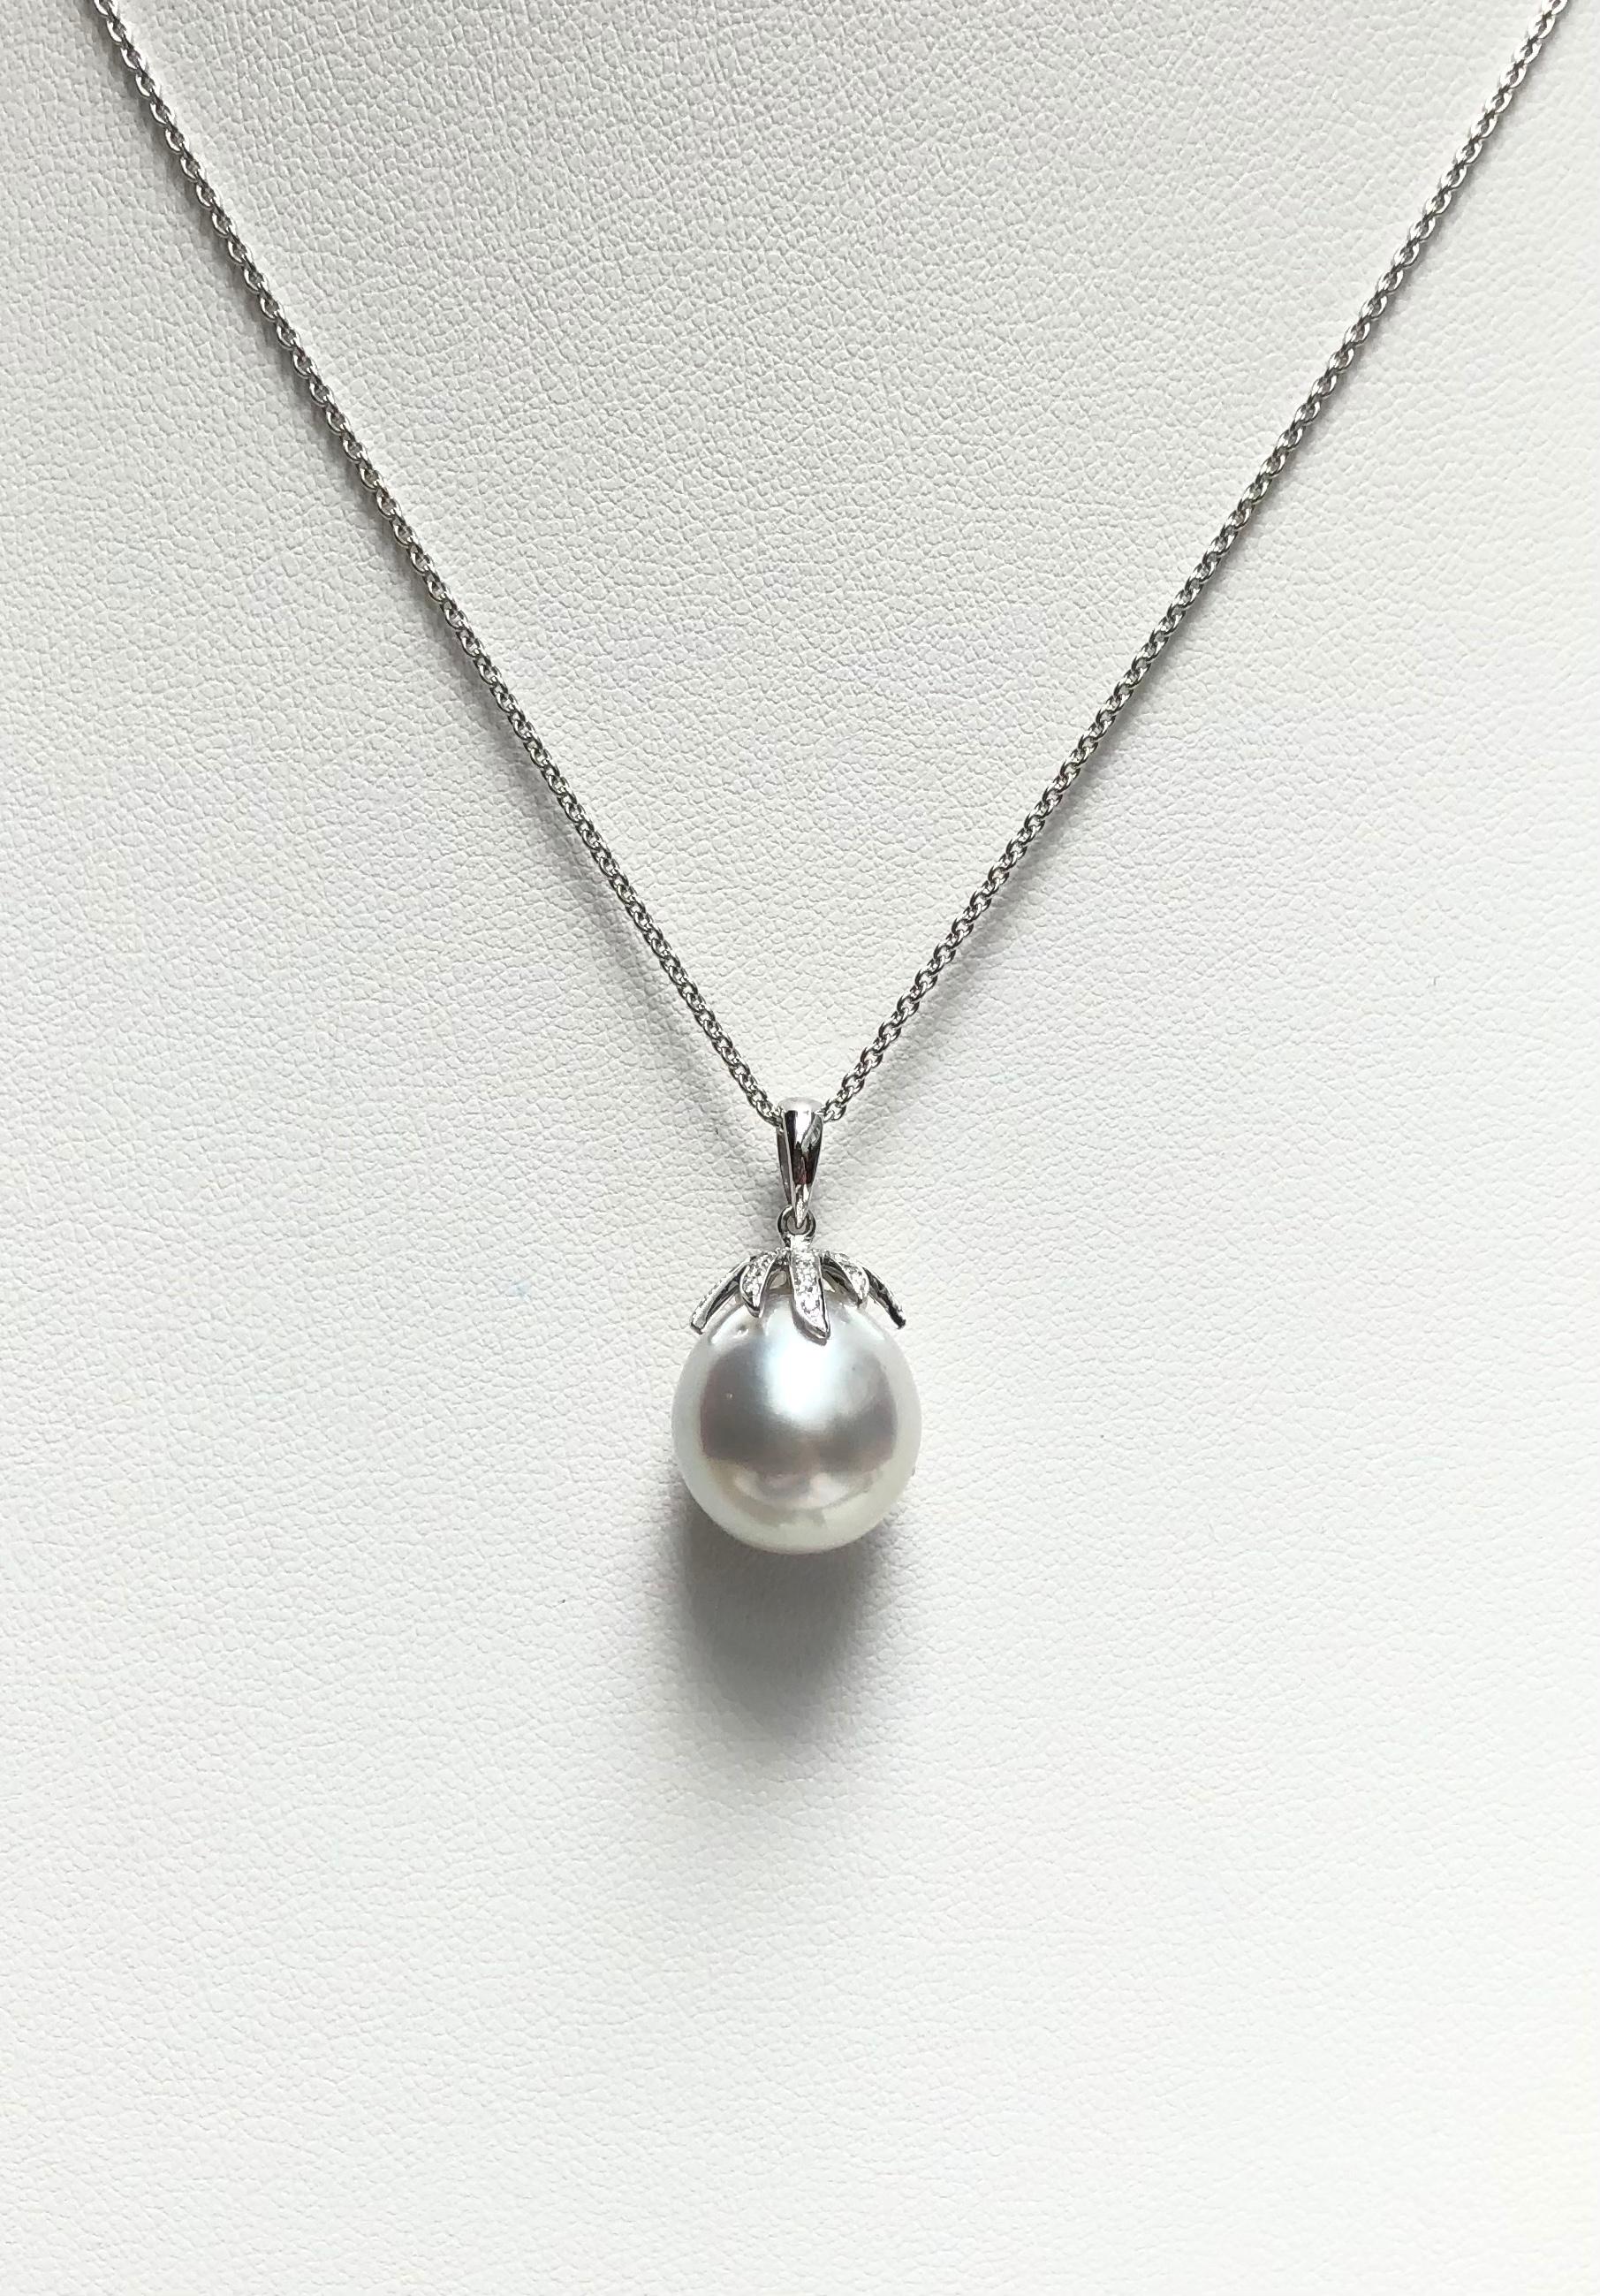 South Sea Pearl with Diamond 0.10 carat Pendant set in 18 Karat White Gold Settings
(chain not included)

Width:  1.2 cm 
Length: 2.1 cm
Total Weight: 4.55 grams

